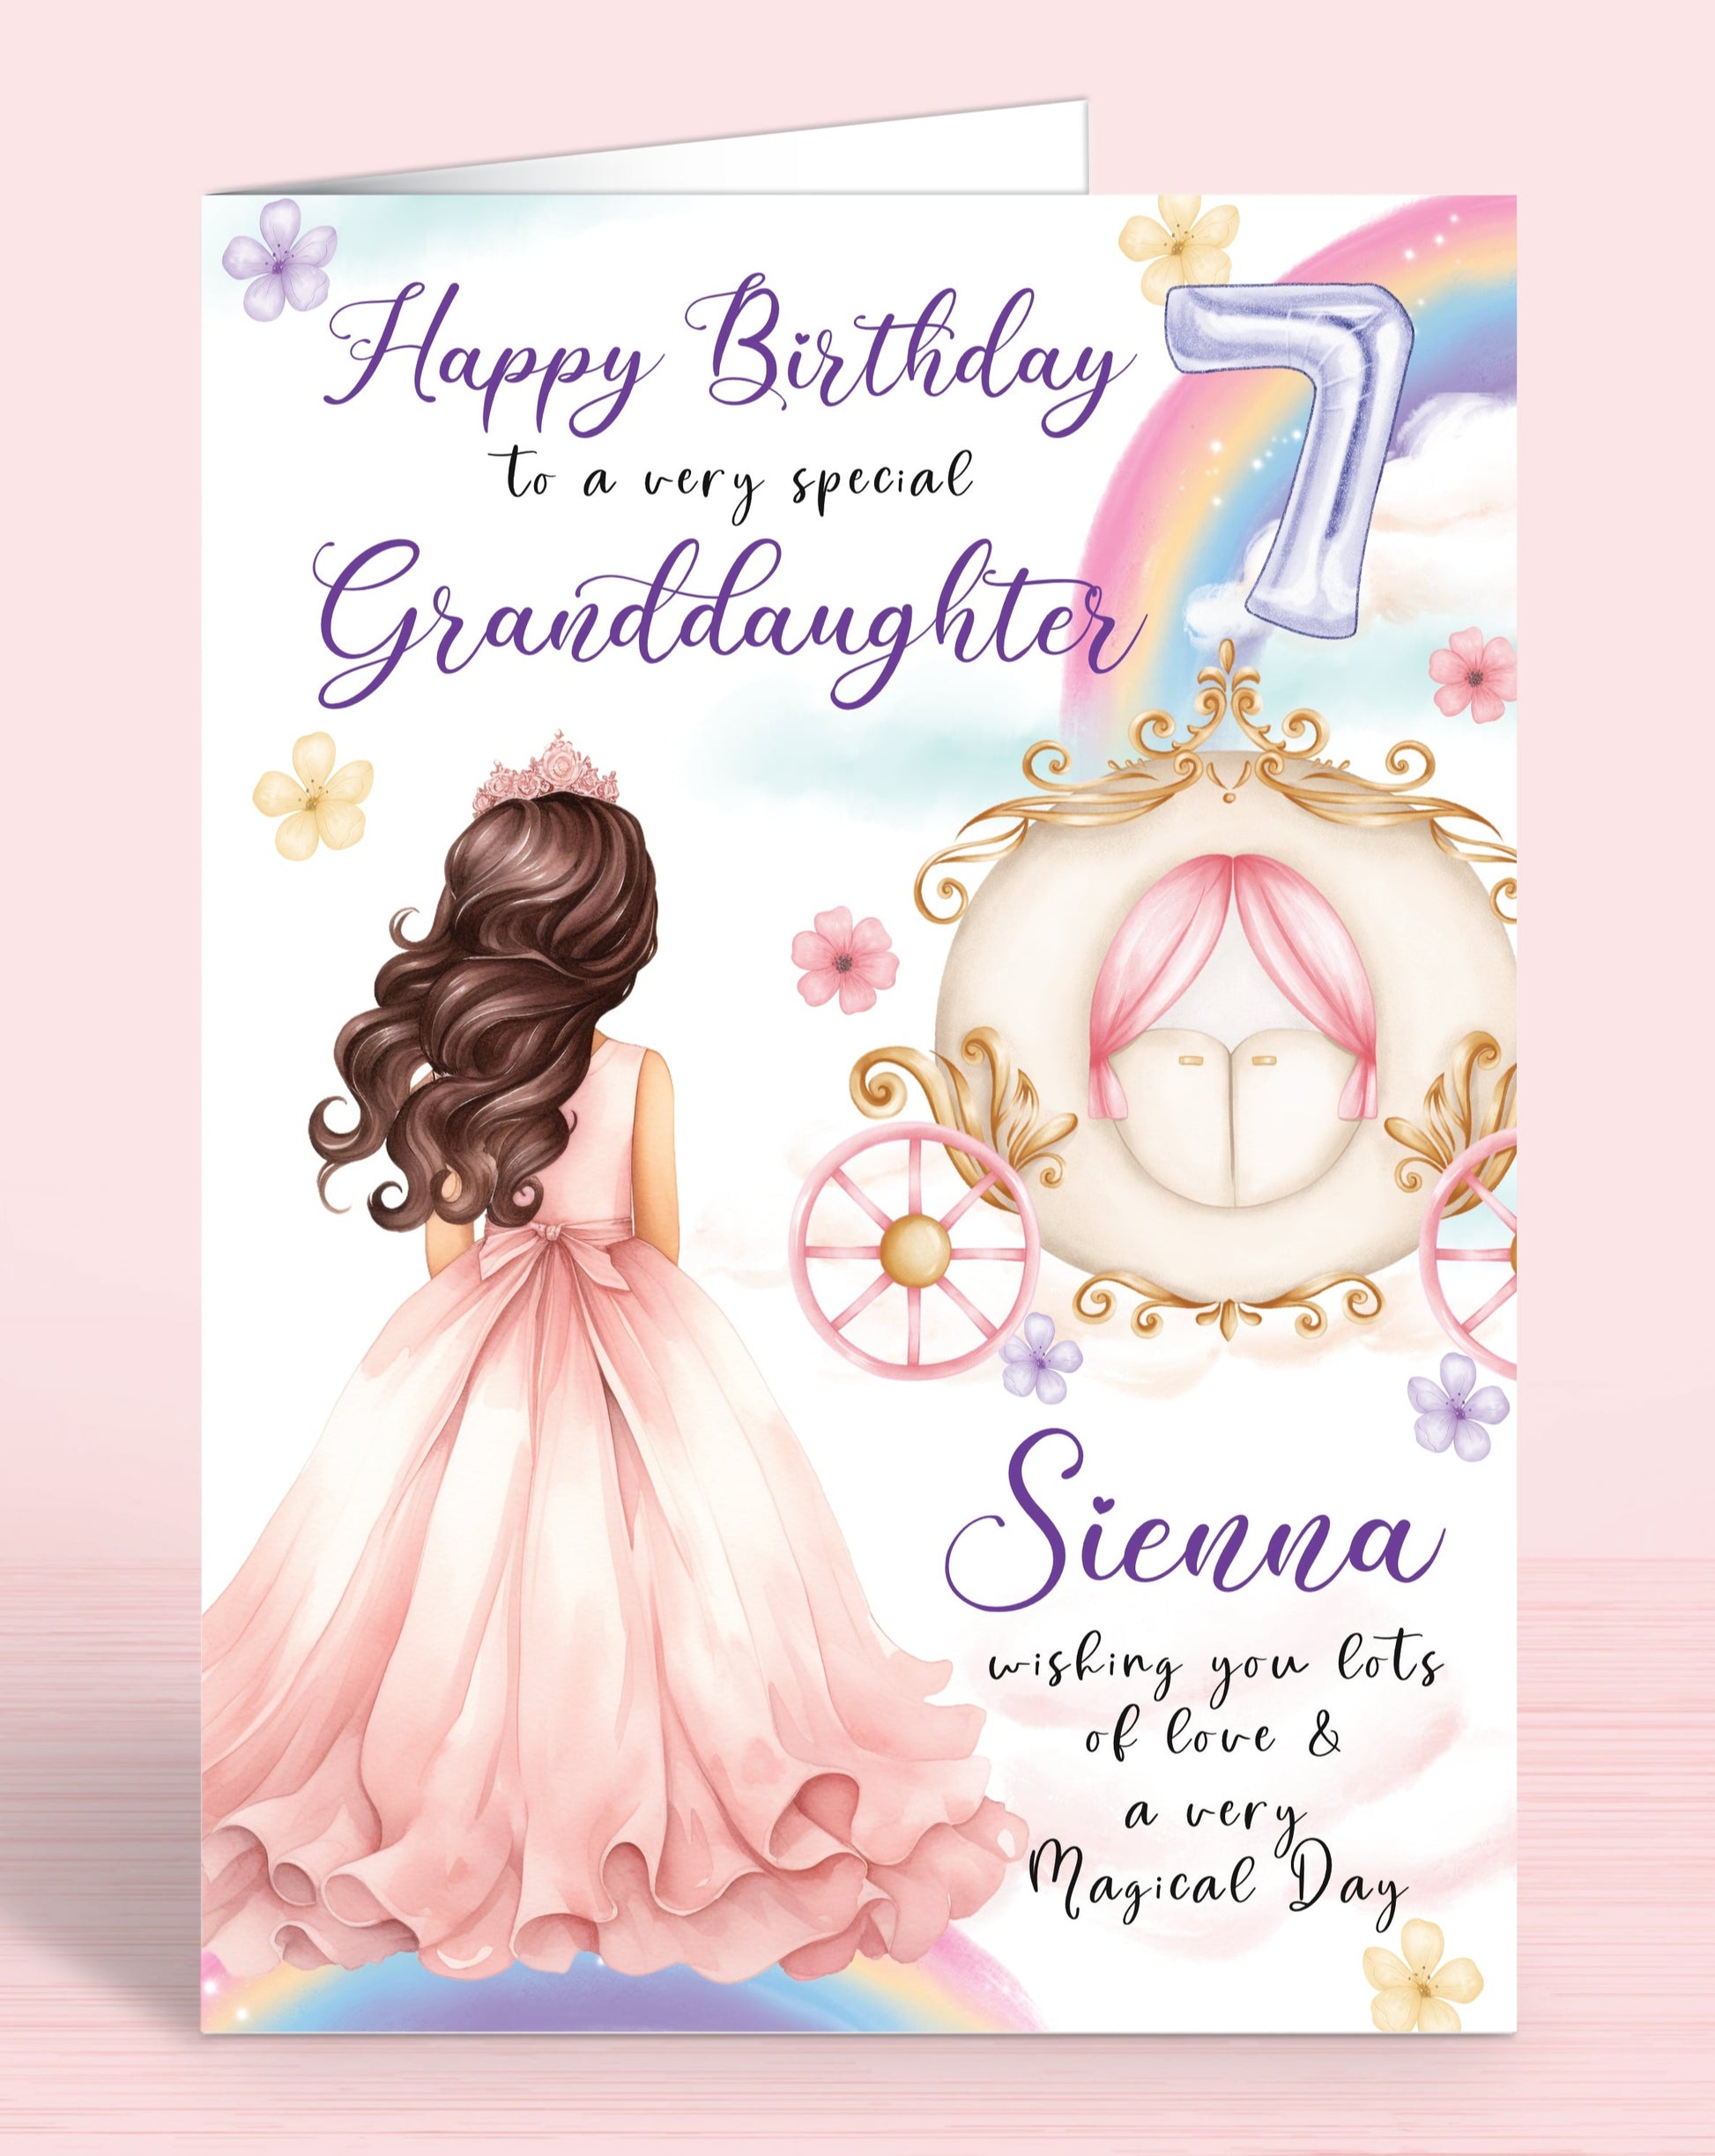 Princess Carriage Personalised Birthday Card, Daughter 6th, 7th Birthday Card, Happy Birthday to a very special Granddaughter, [Name] wishing you lots of love & a very Magical Day [GIRL B] DARK BROWN HAIR | Oliver Rose Designs